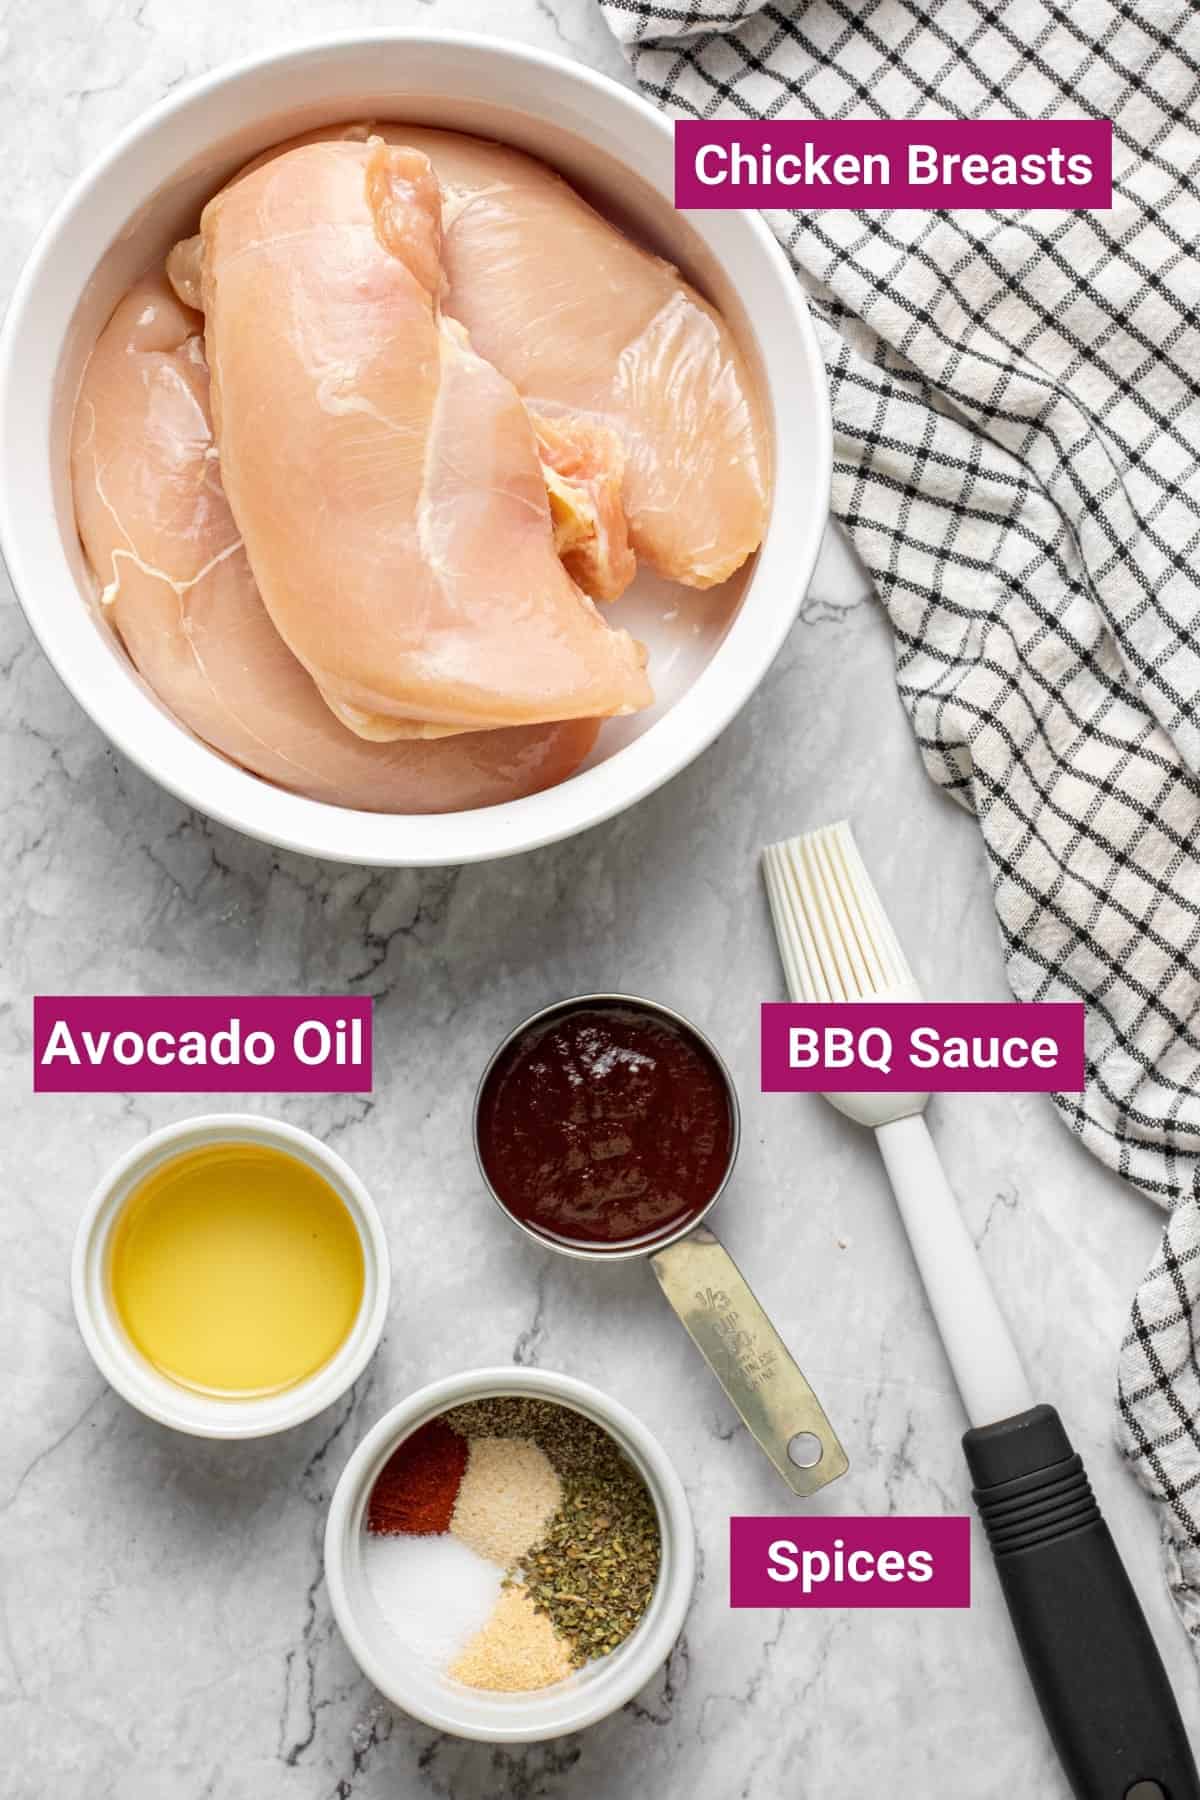 raw boneless chicken breasts, avocado oil, bbq sauce, and spices in separate bowls